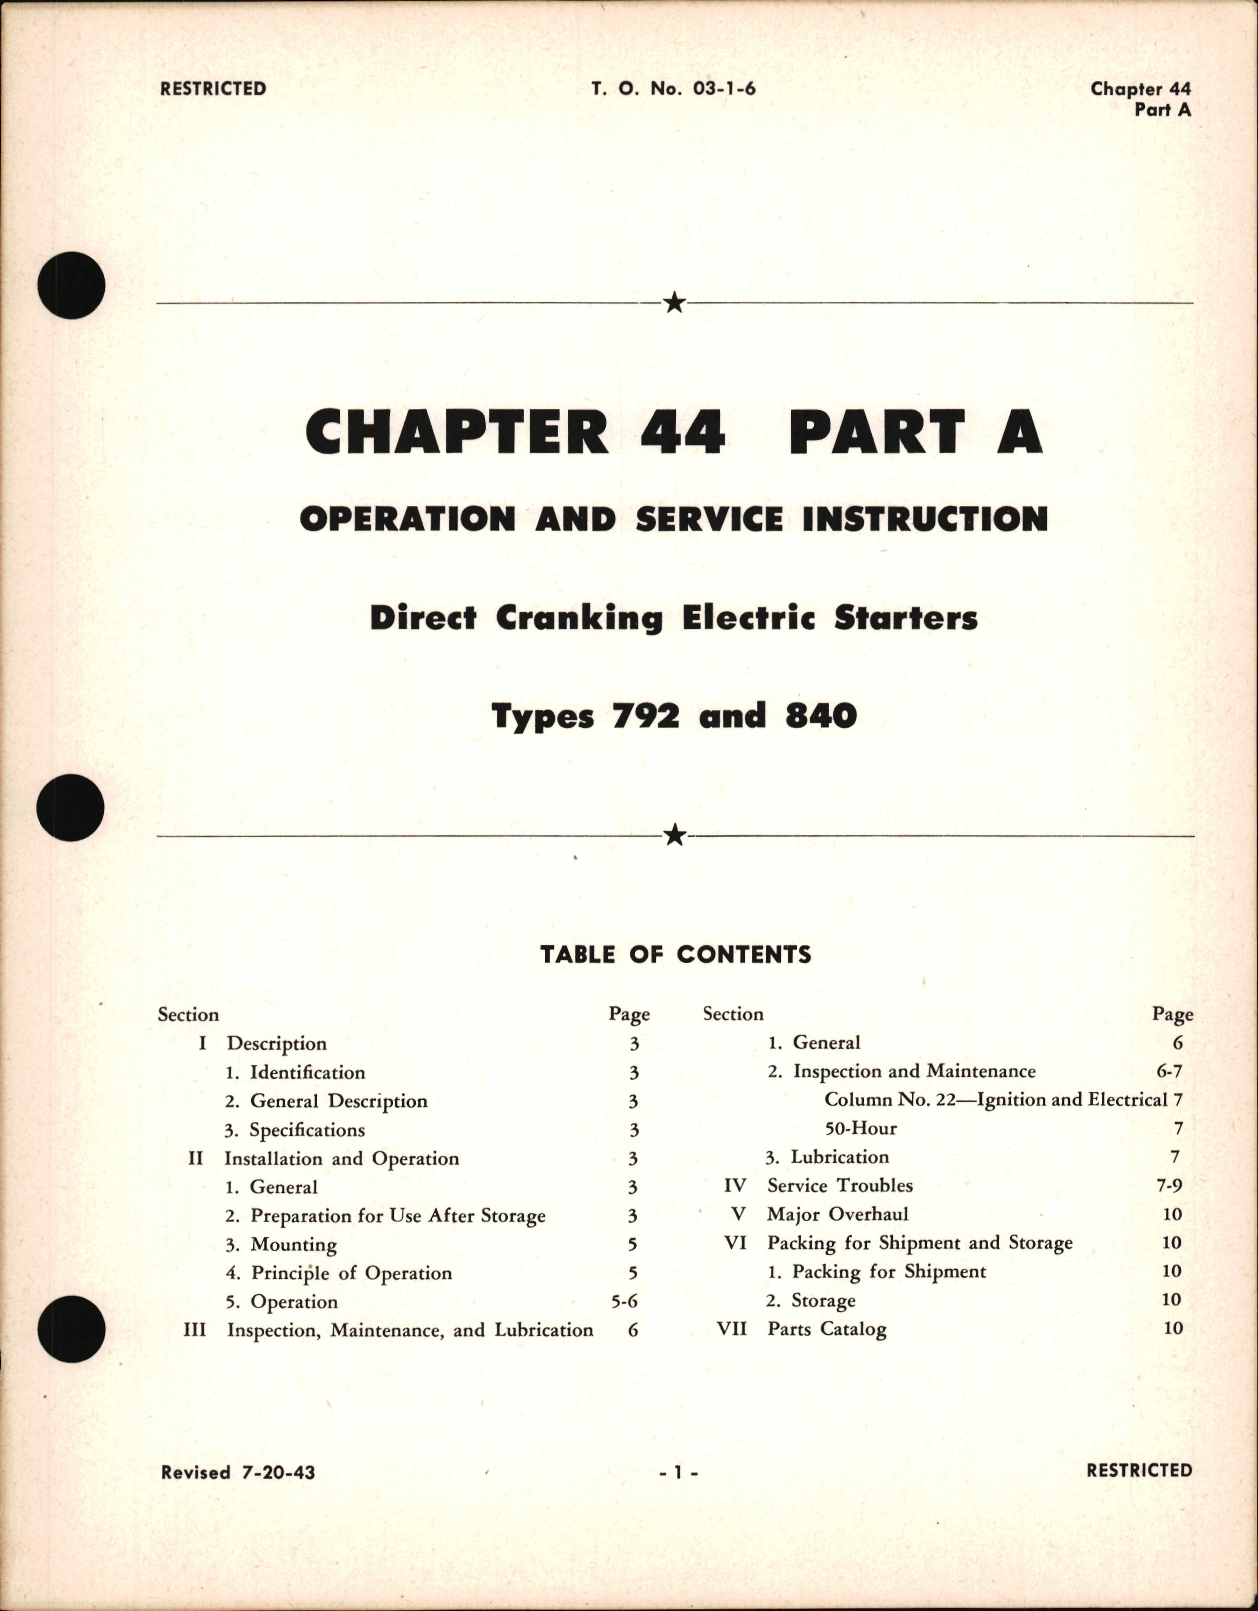 Sample page 1 from AirCorps Library document: Operation and Service Instruction for Direct Cranking Electric Starters, Chapter 44 Part A